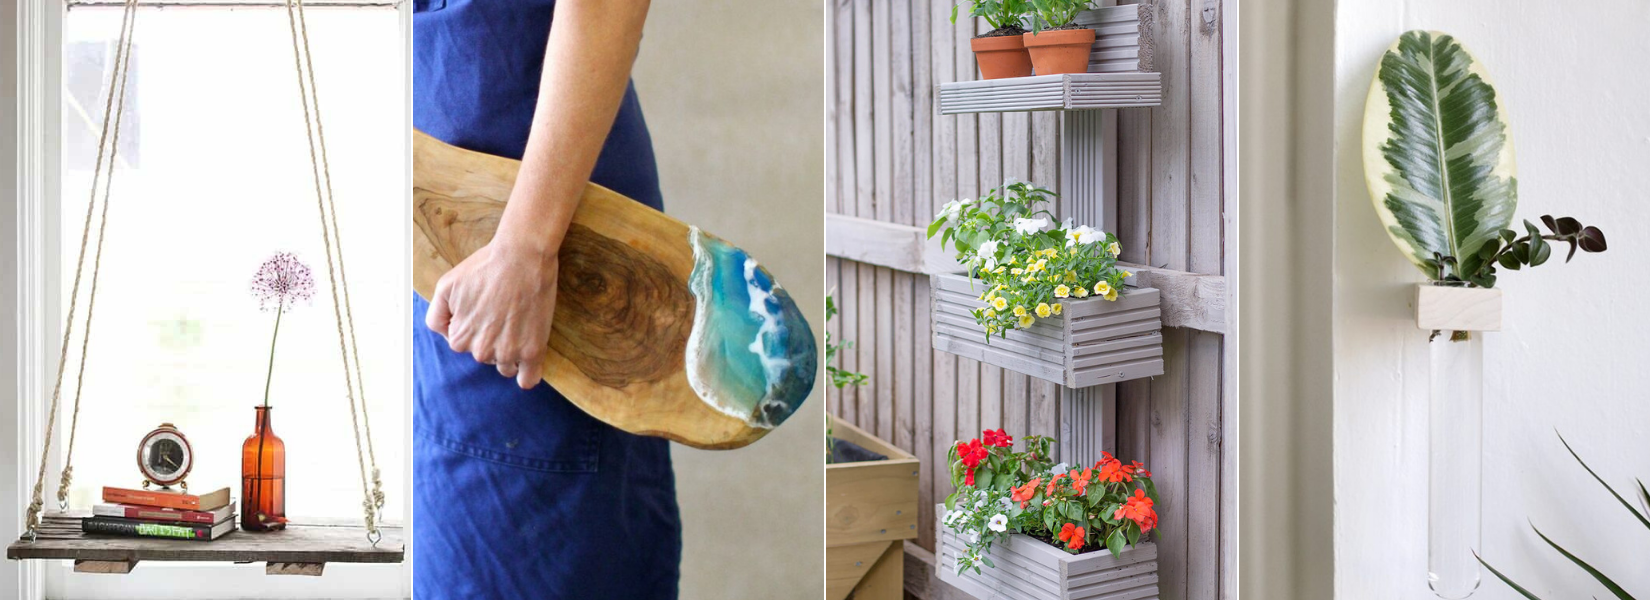 18 Easy DIY Spring Decor Projects You Will Love to Make for Your Home